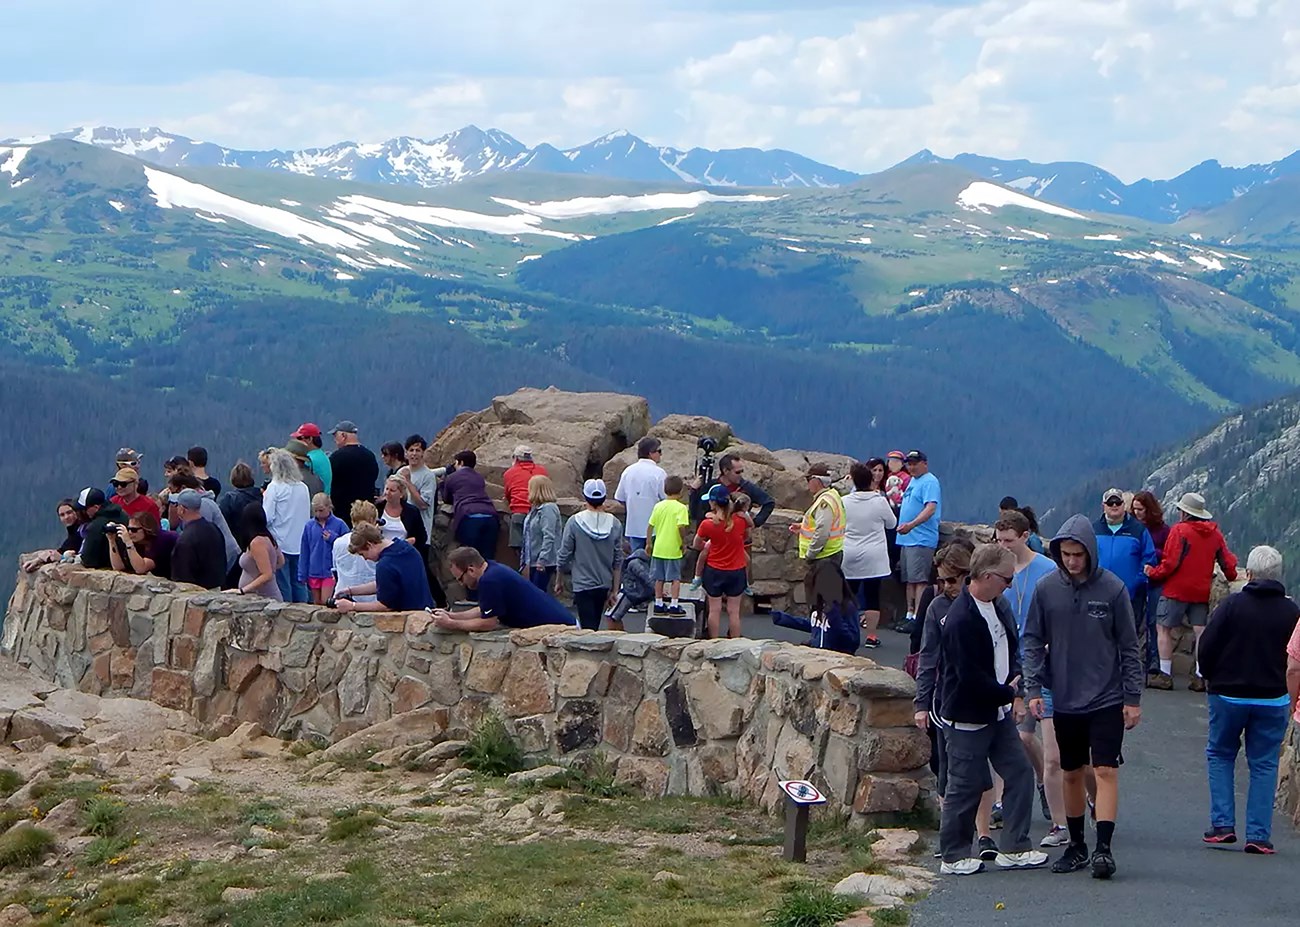 A mountain view with an overlook crowded with visitors